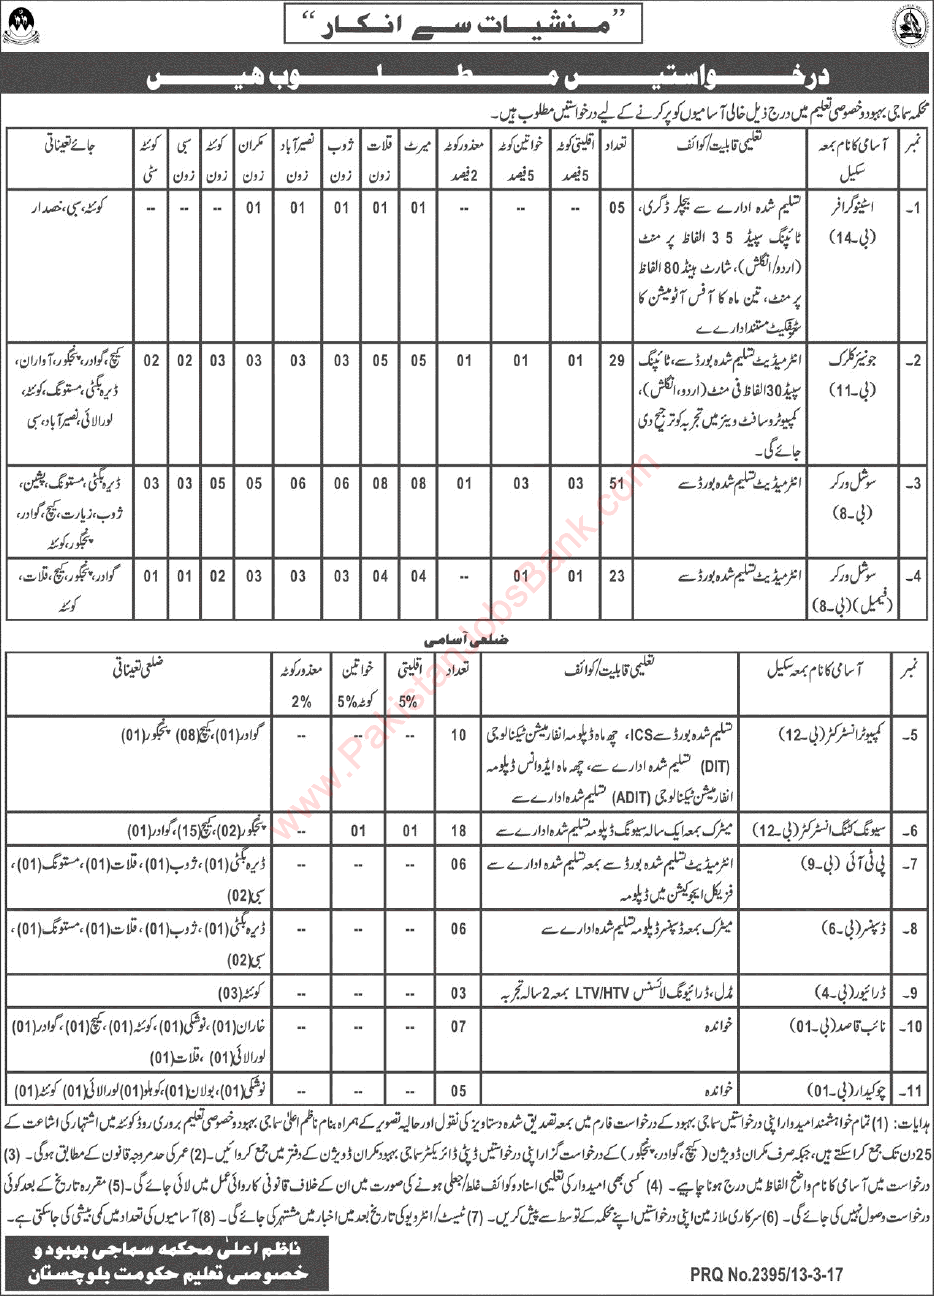 Social Welfare Department Balochistan Jobs 2017 March Social Workers, Clerks, Computer Instructors & Others Latest